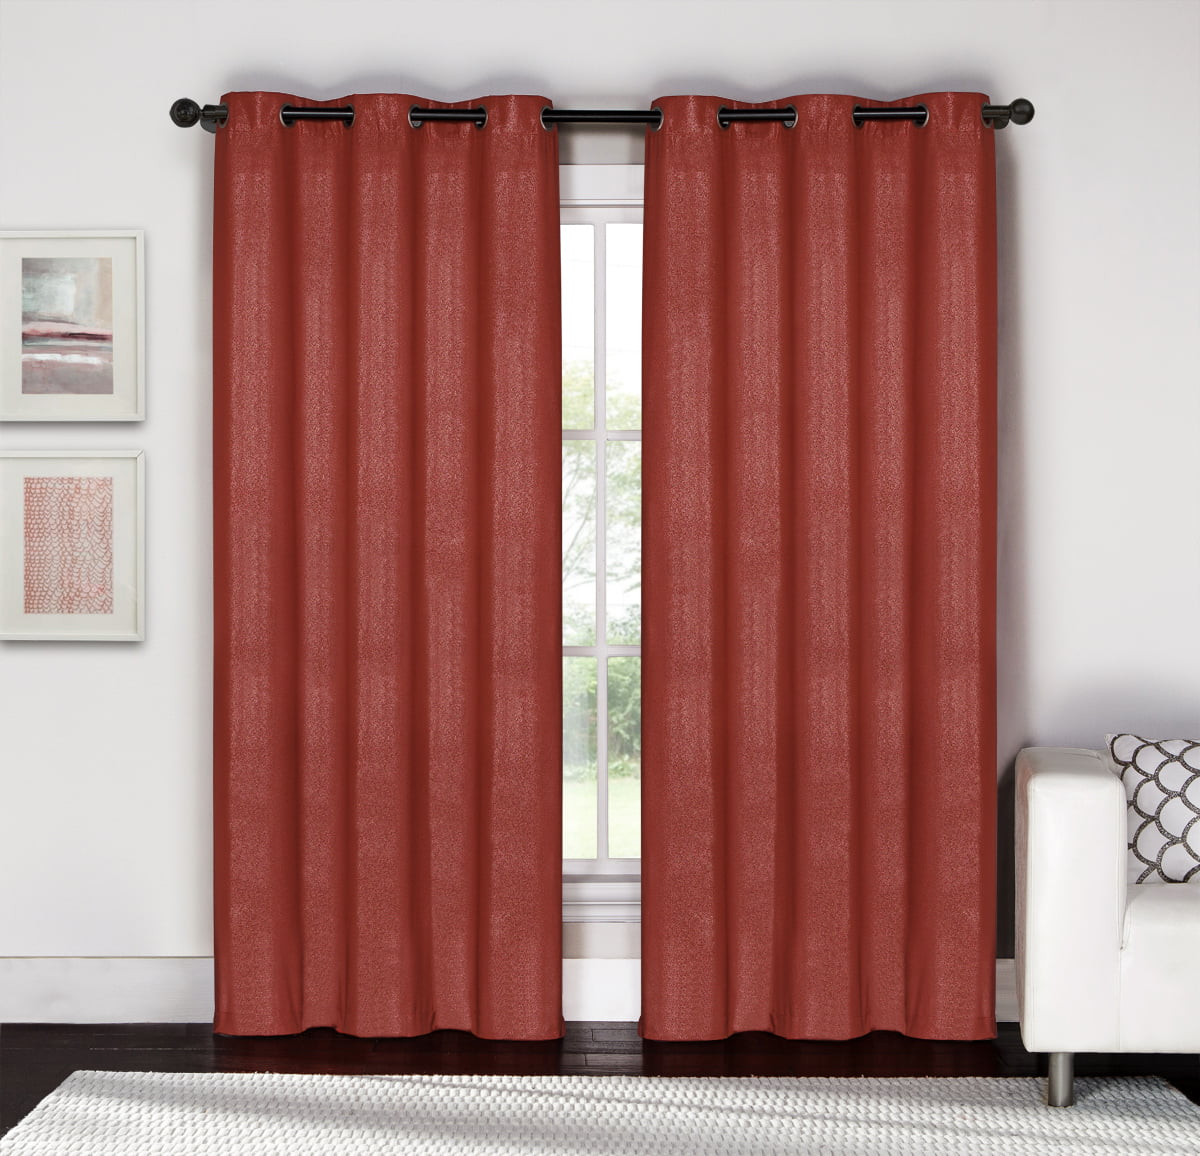 NEW 2 PRINTED SILVER GROMMET PANELS LINED BLACKOUT WINDOW CURTAIN BETH RED 